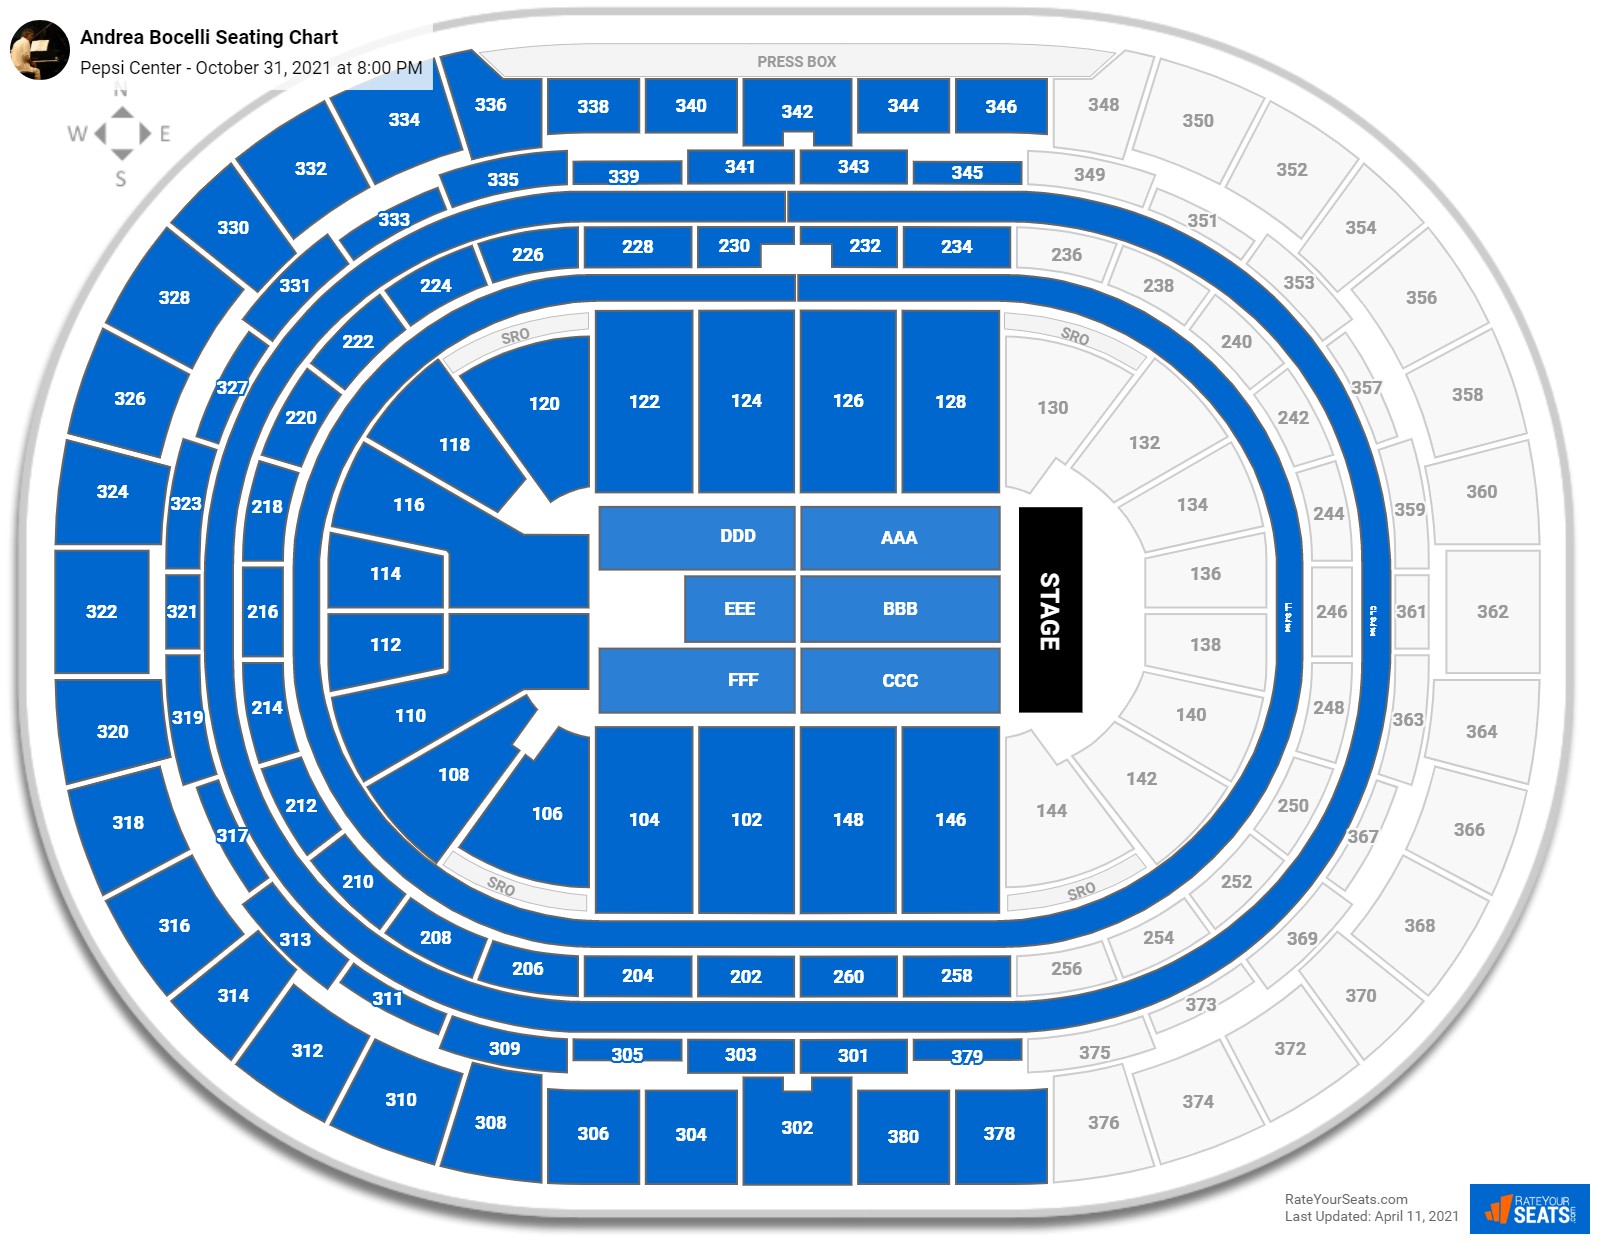 Ball Arena Seating Charts for Concerts